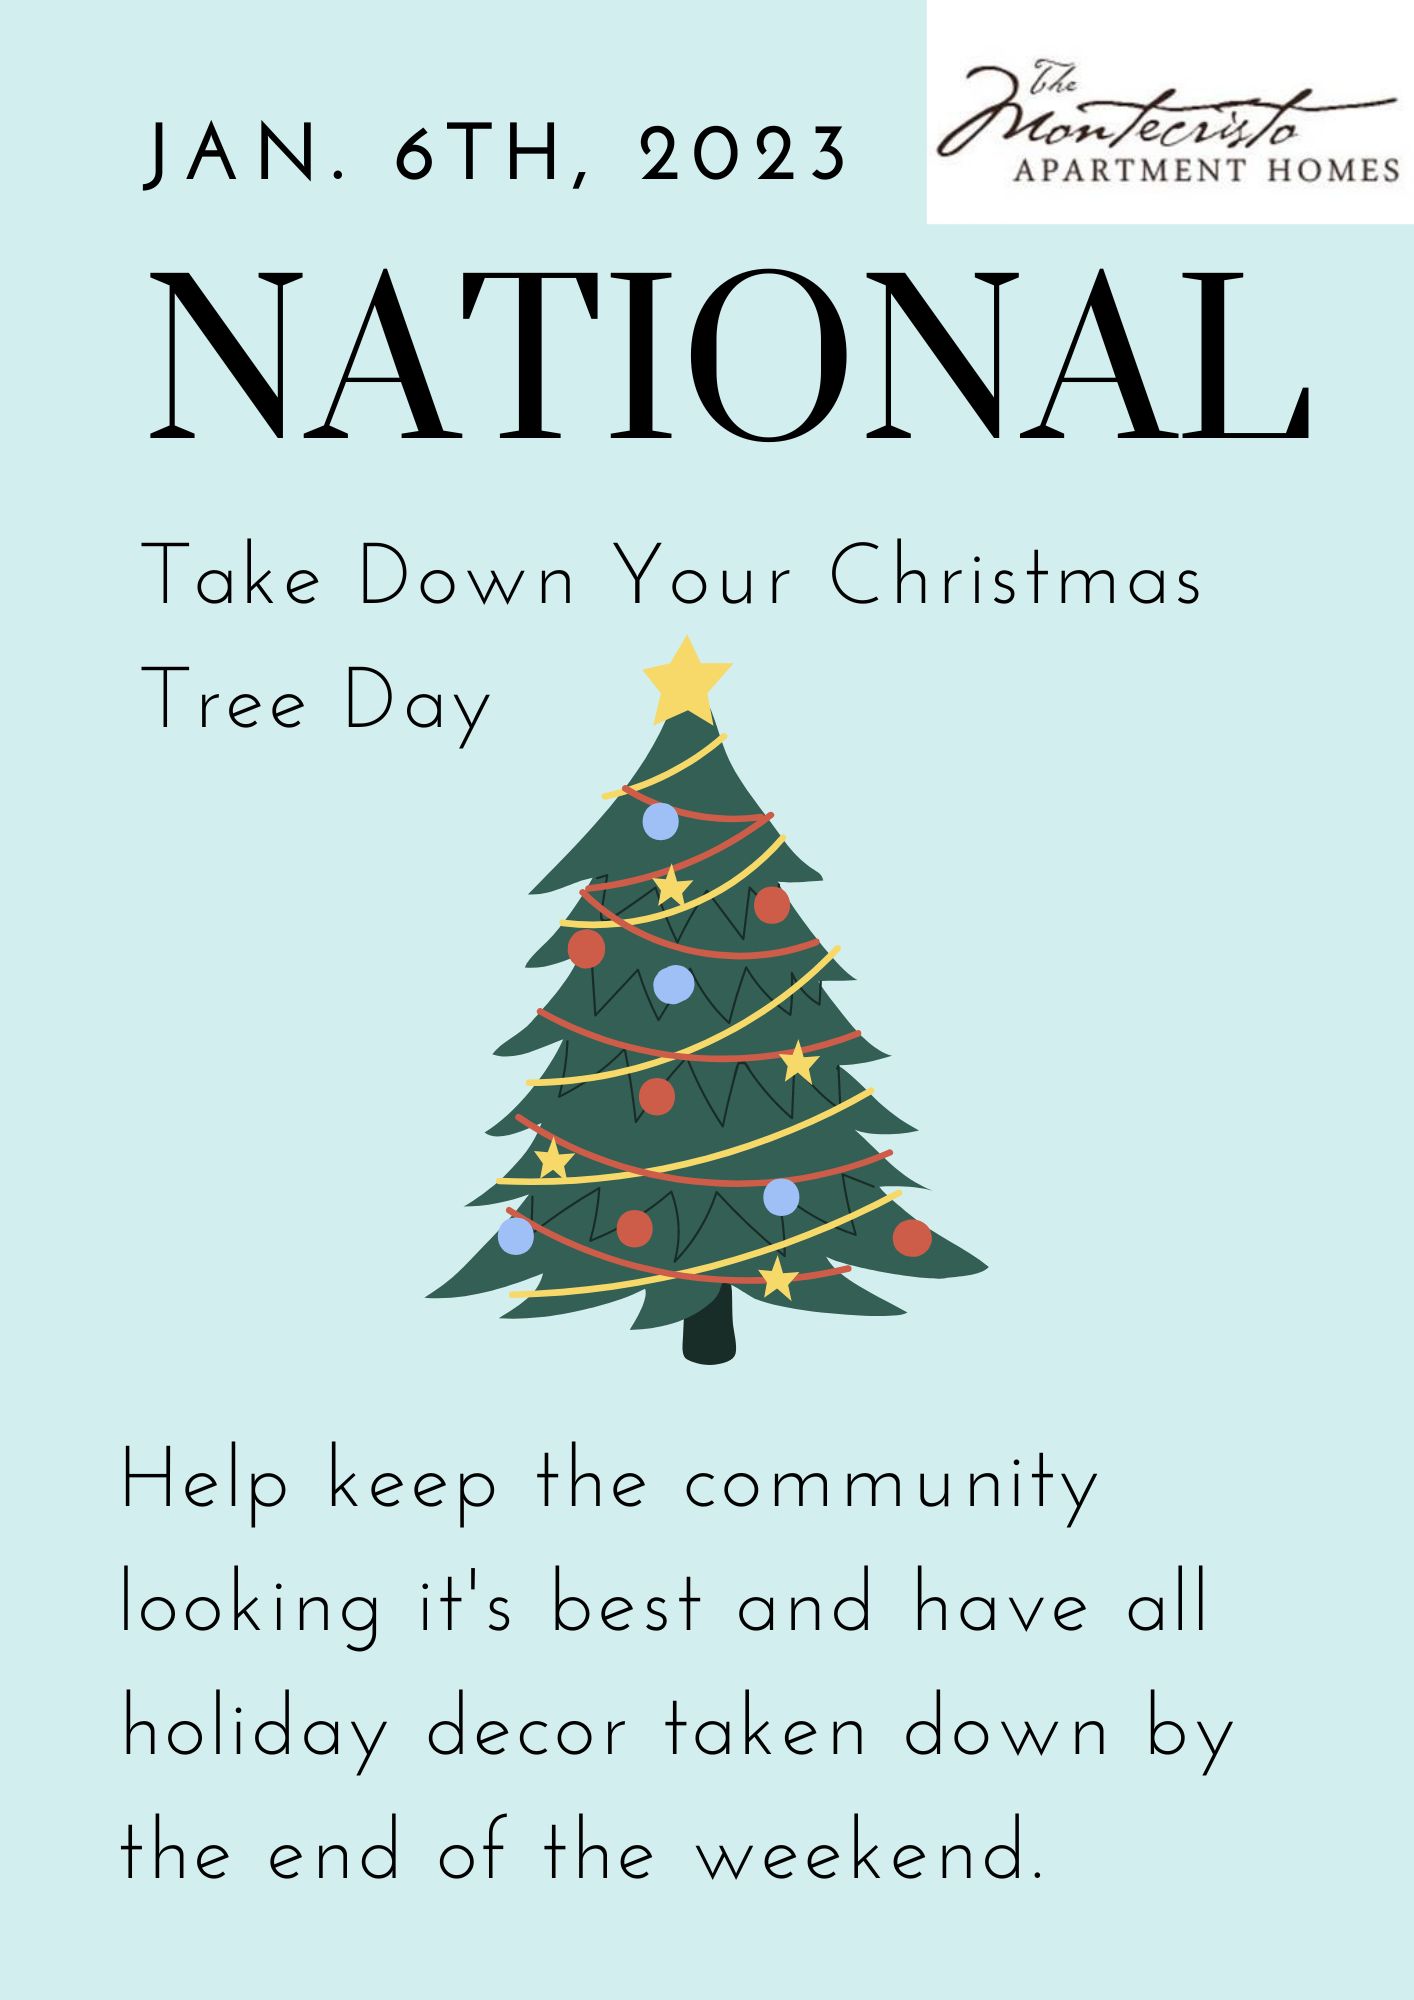 Celebrate the national take down your Christmas day at The Montecristo Apartments in Stone Oak, TX.